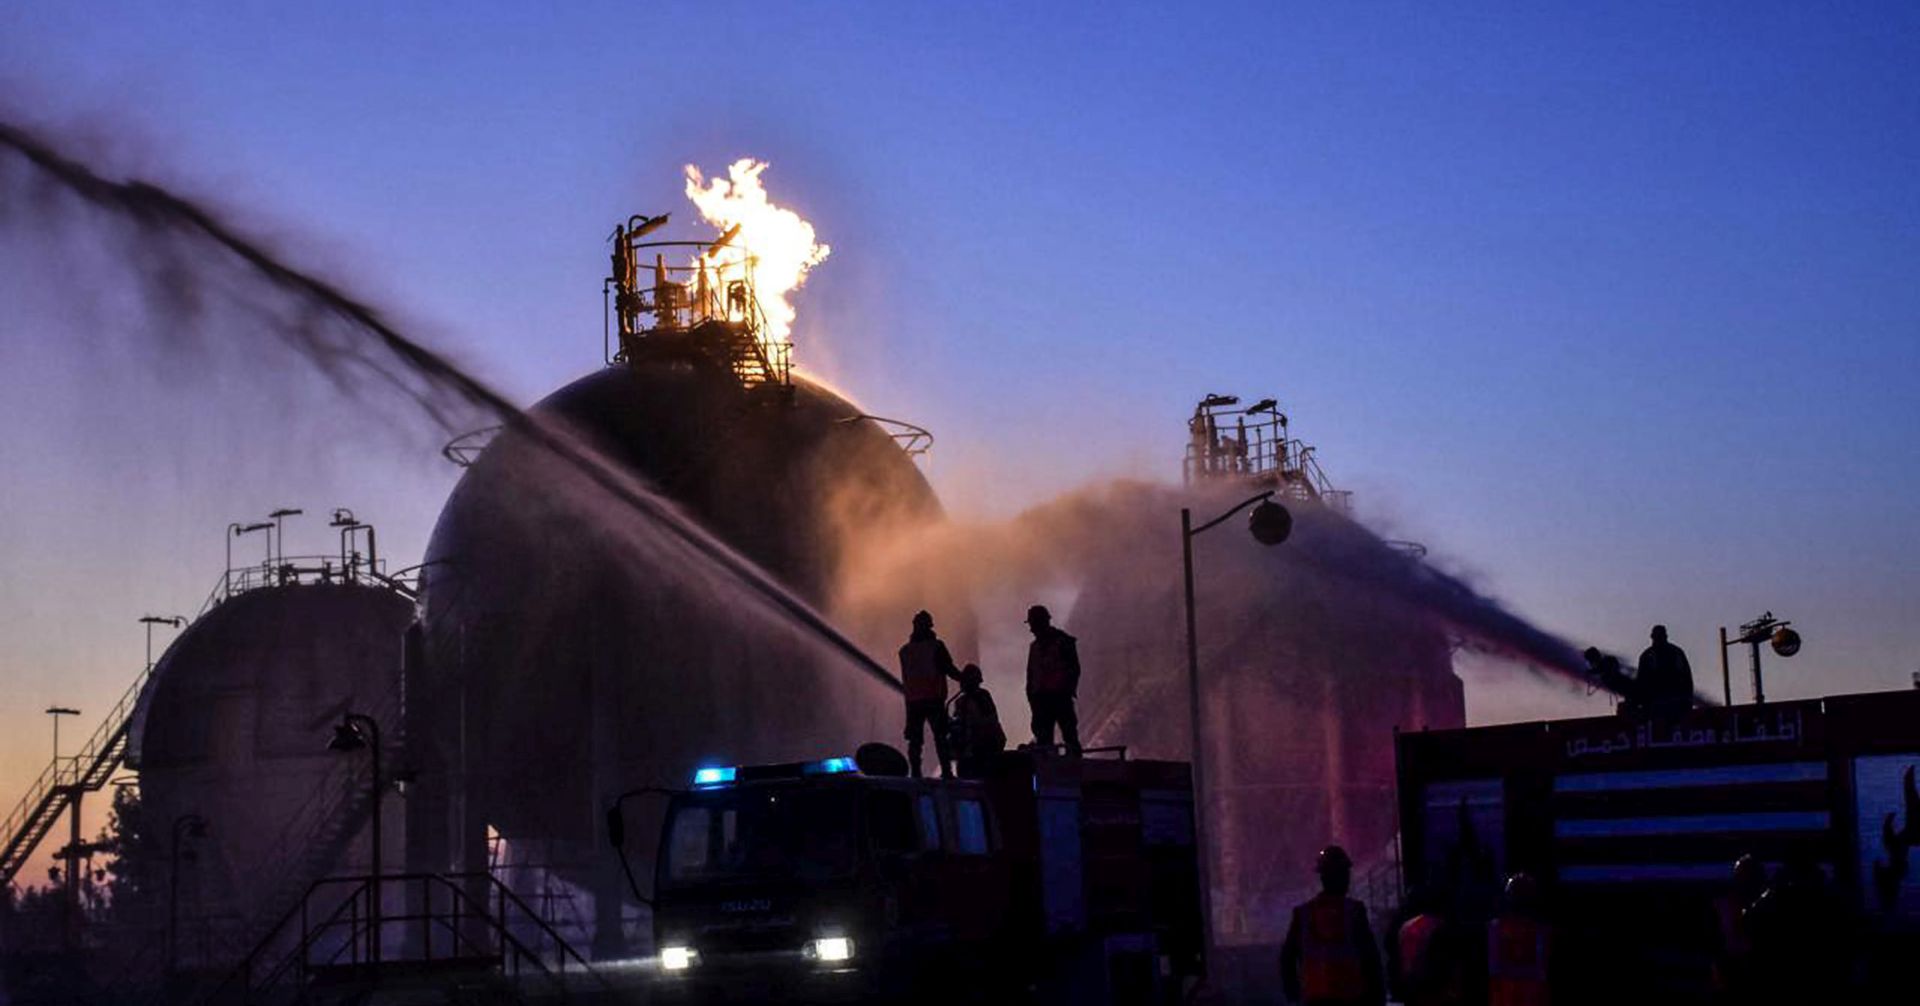 epa08084623 A handout photo made available by the official Syrian Arab News Agency (SANA) shows firefighters extinguishing a fire at the Homs refinery, Homs governorate, Syria, 21 December 2019. According to SANA, the Homs refinery, Gas factory of southern Central region and al-Rayan Gas station came under 'terrorist synchronous attacks' causing damage in the production units.  EPA/SANA HANDOUT  HANDOUT EDITORIAL USE ONLY/NO SALES